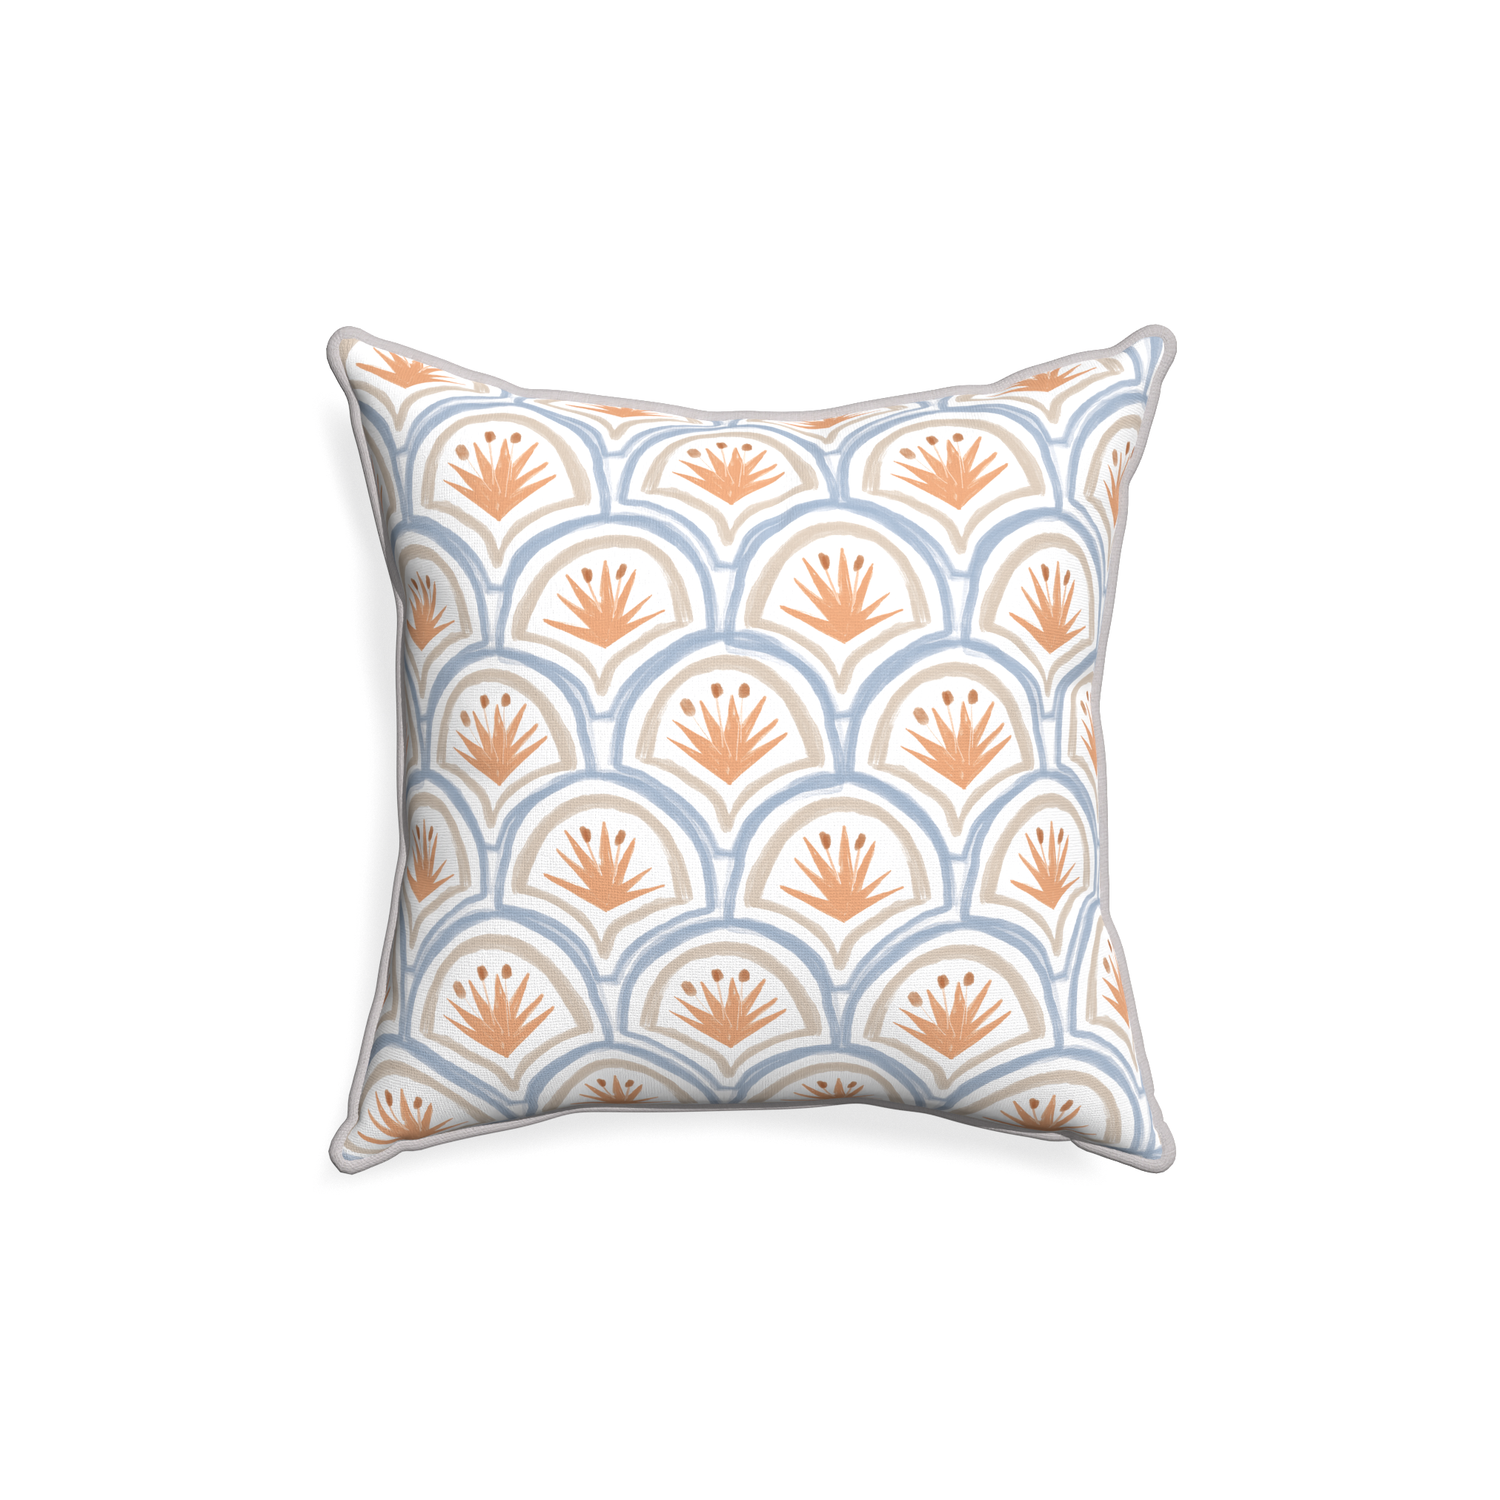 18-square thatcher apricot custom pillow with pebble piping on white background